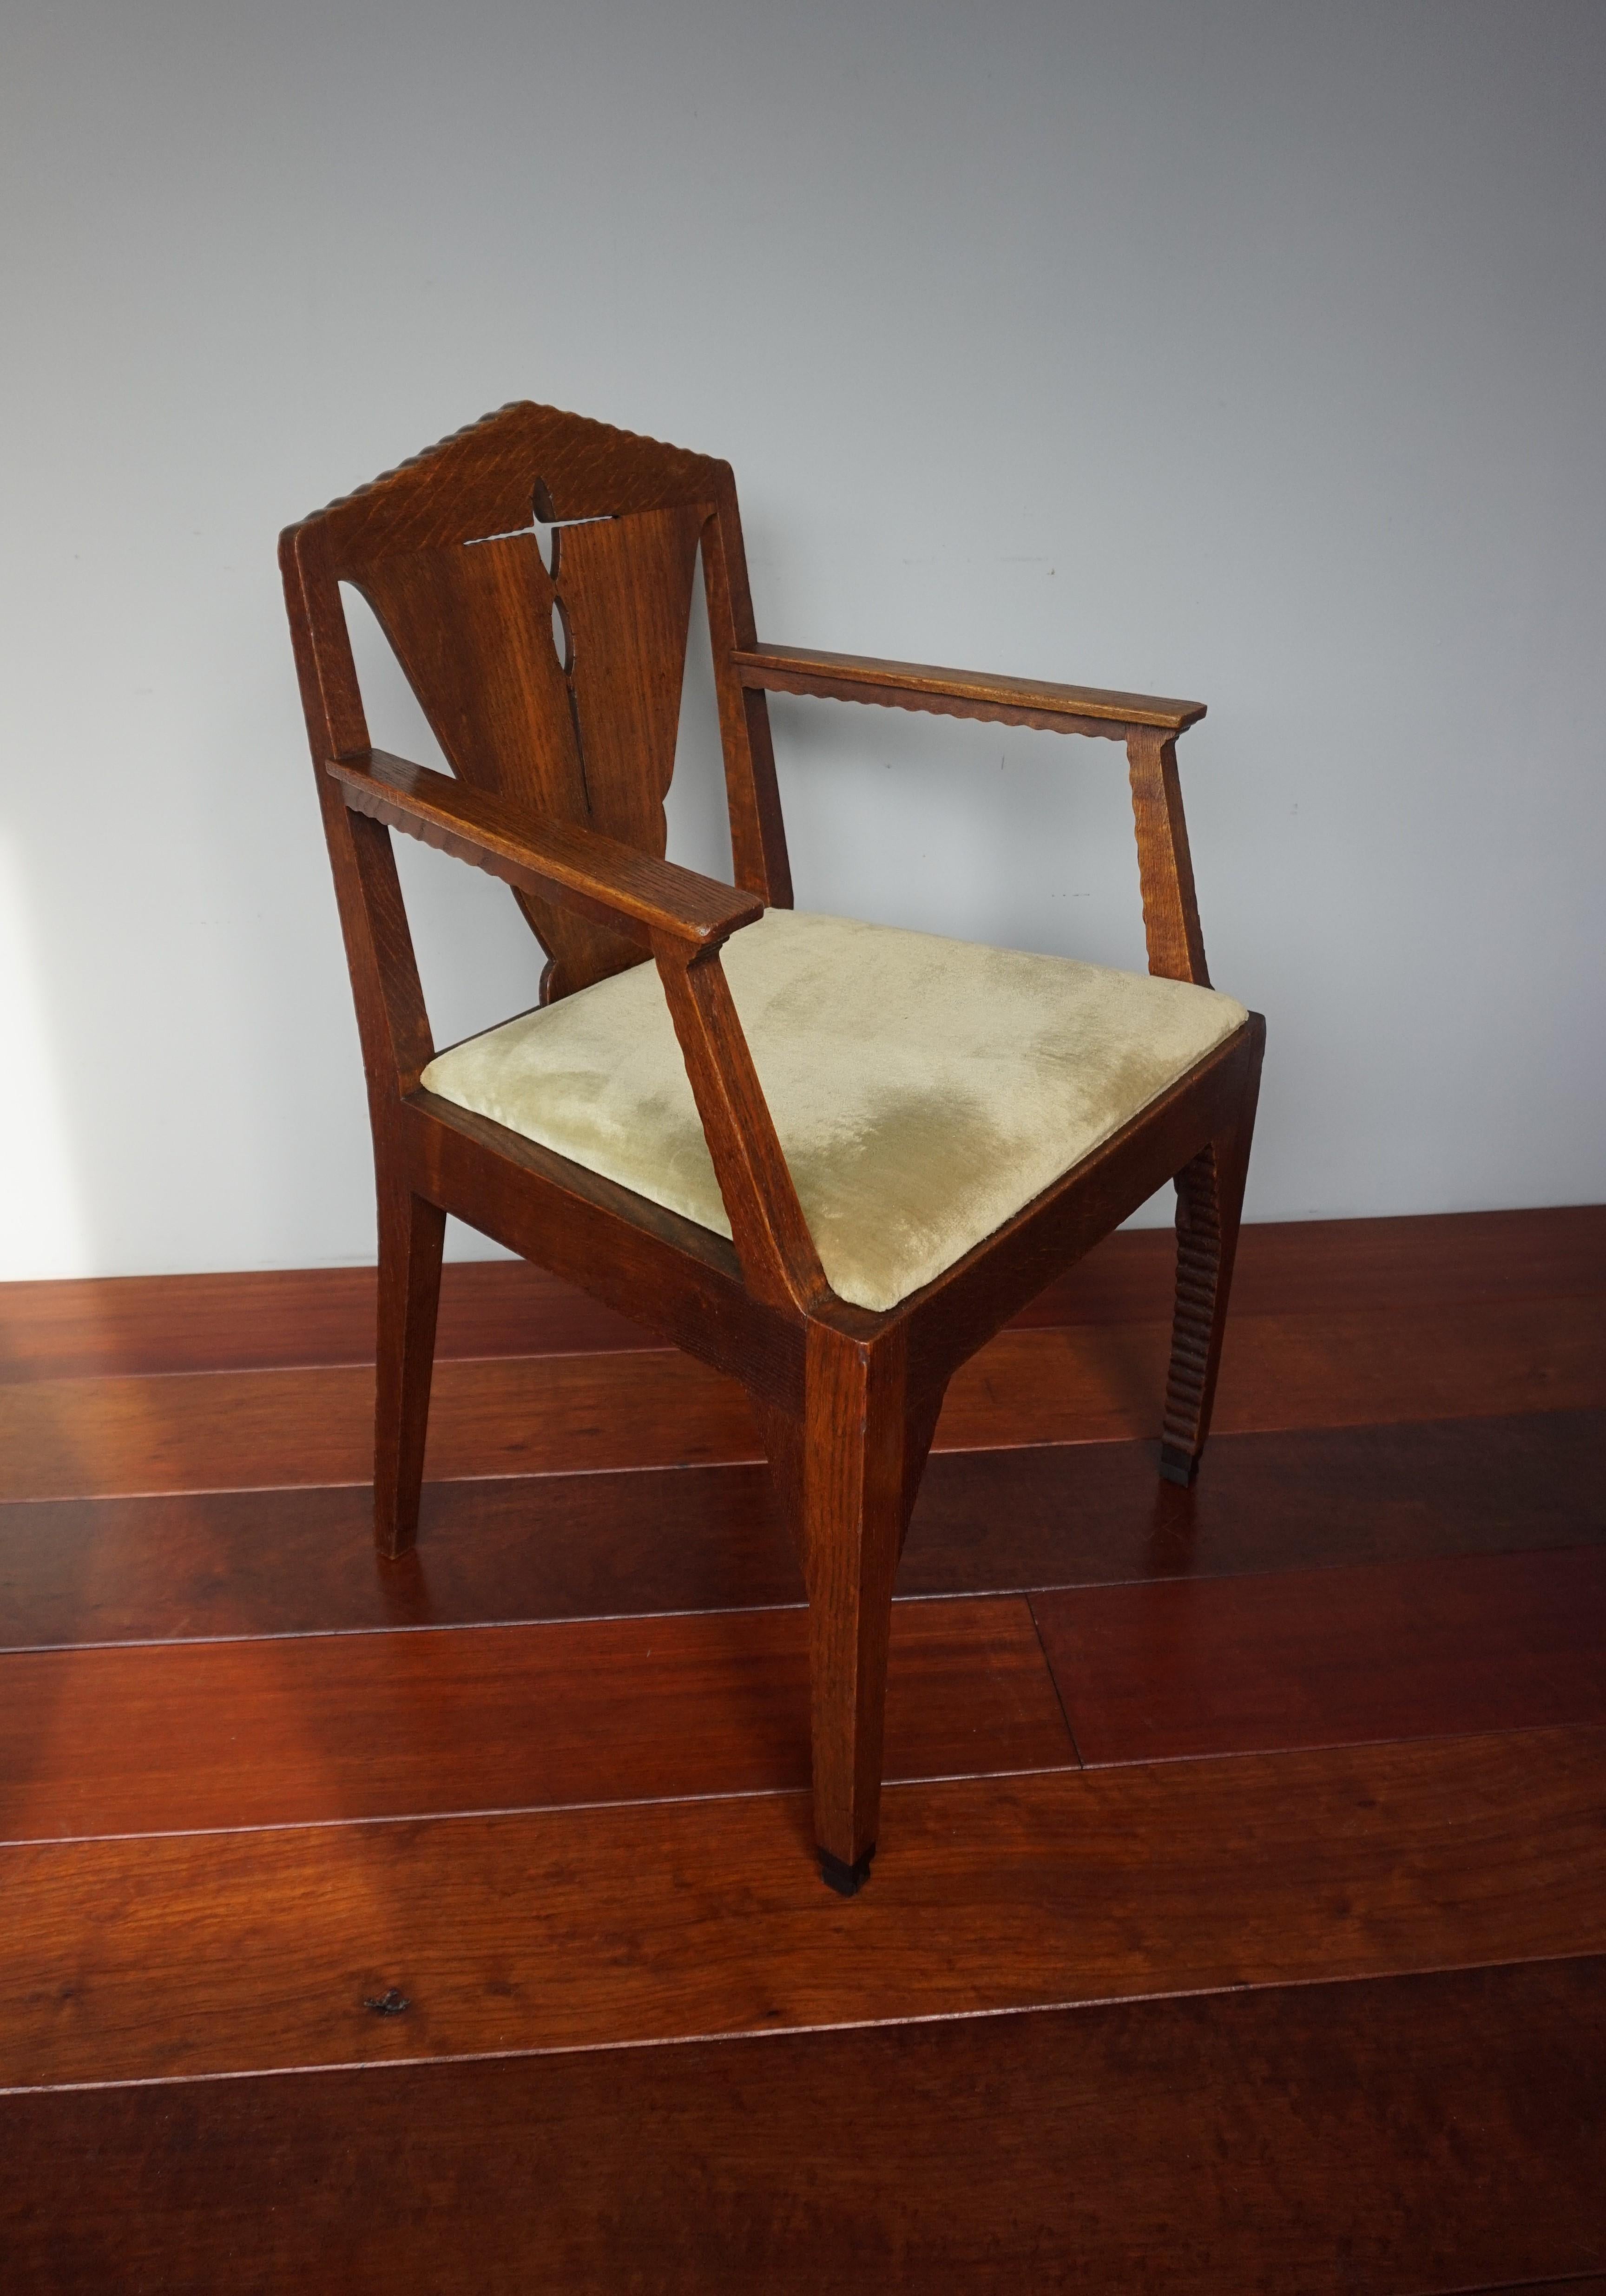 Great design, wonderfully executed and truly comfortable desk chair from circa 1910.

This striking but relatively small size Arts & Crafts desk chair is ideal for ladies or for not so tall gentlemen. It is of modest proportion, but the design is